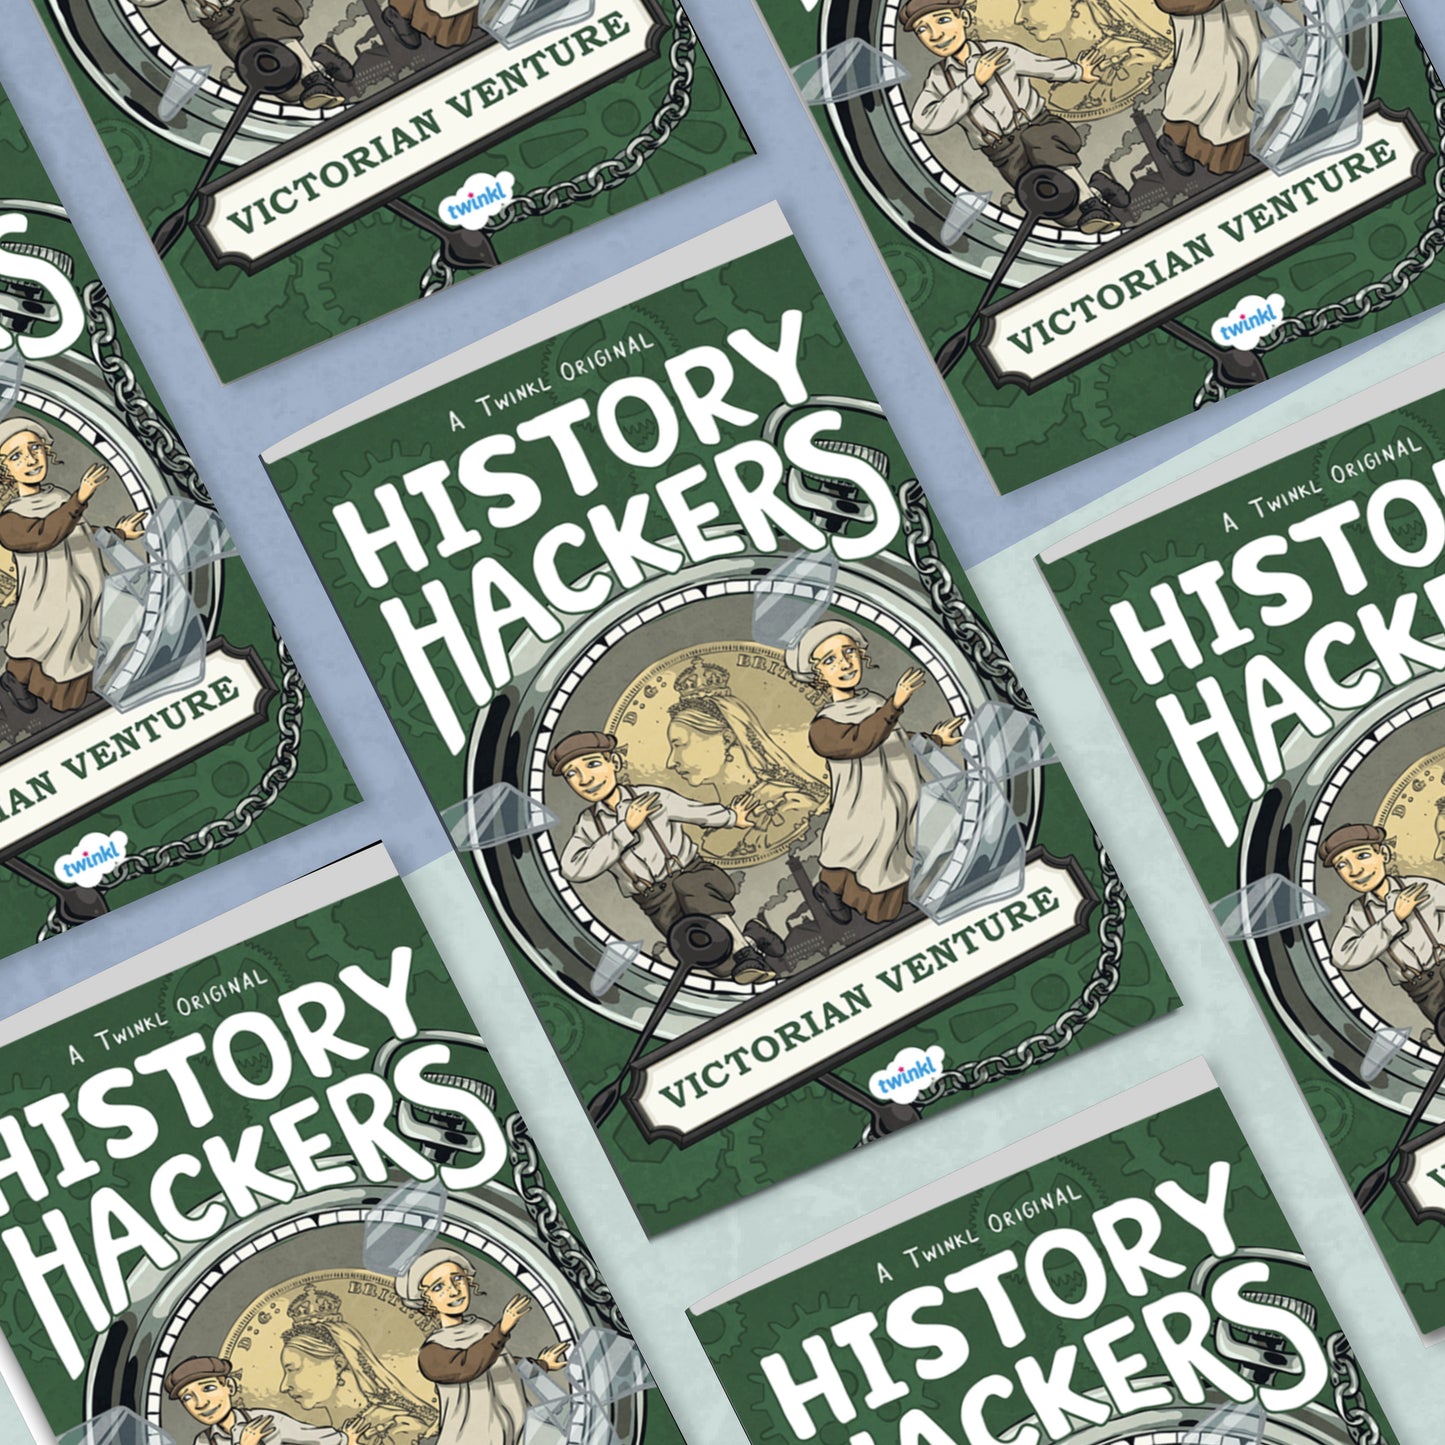 The History Hackers Trilogy (7-11)